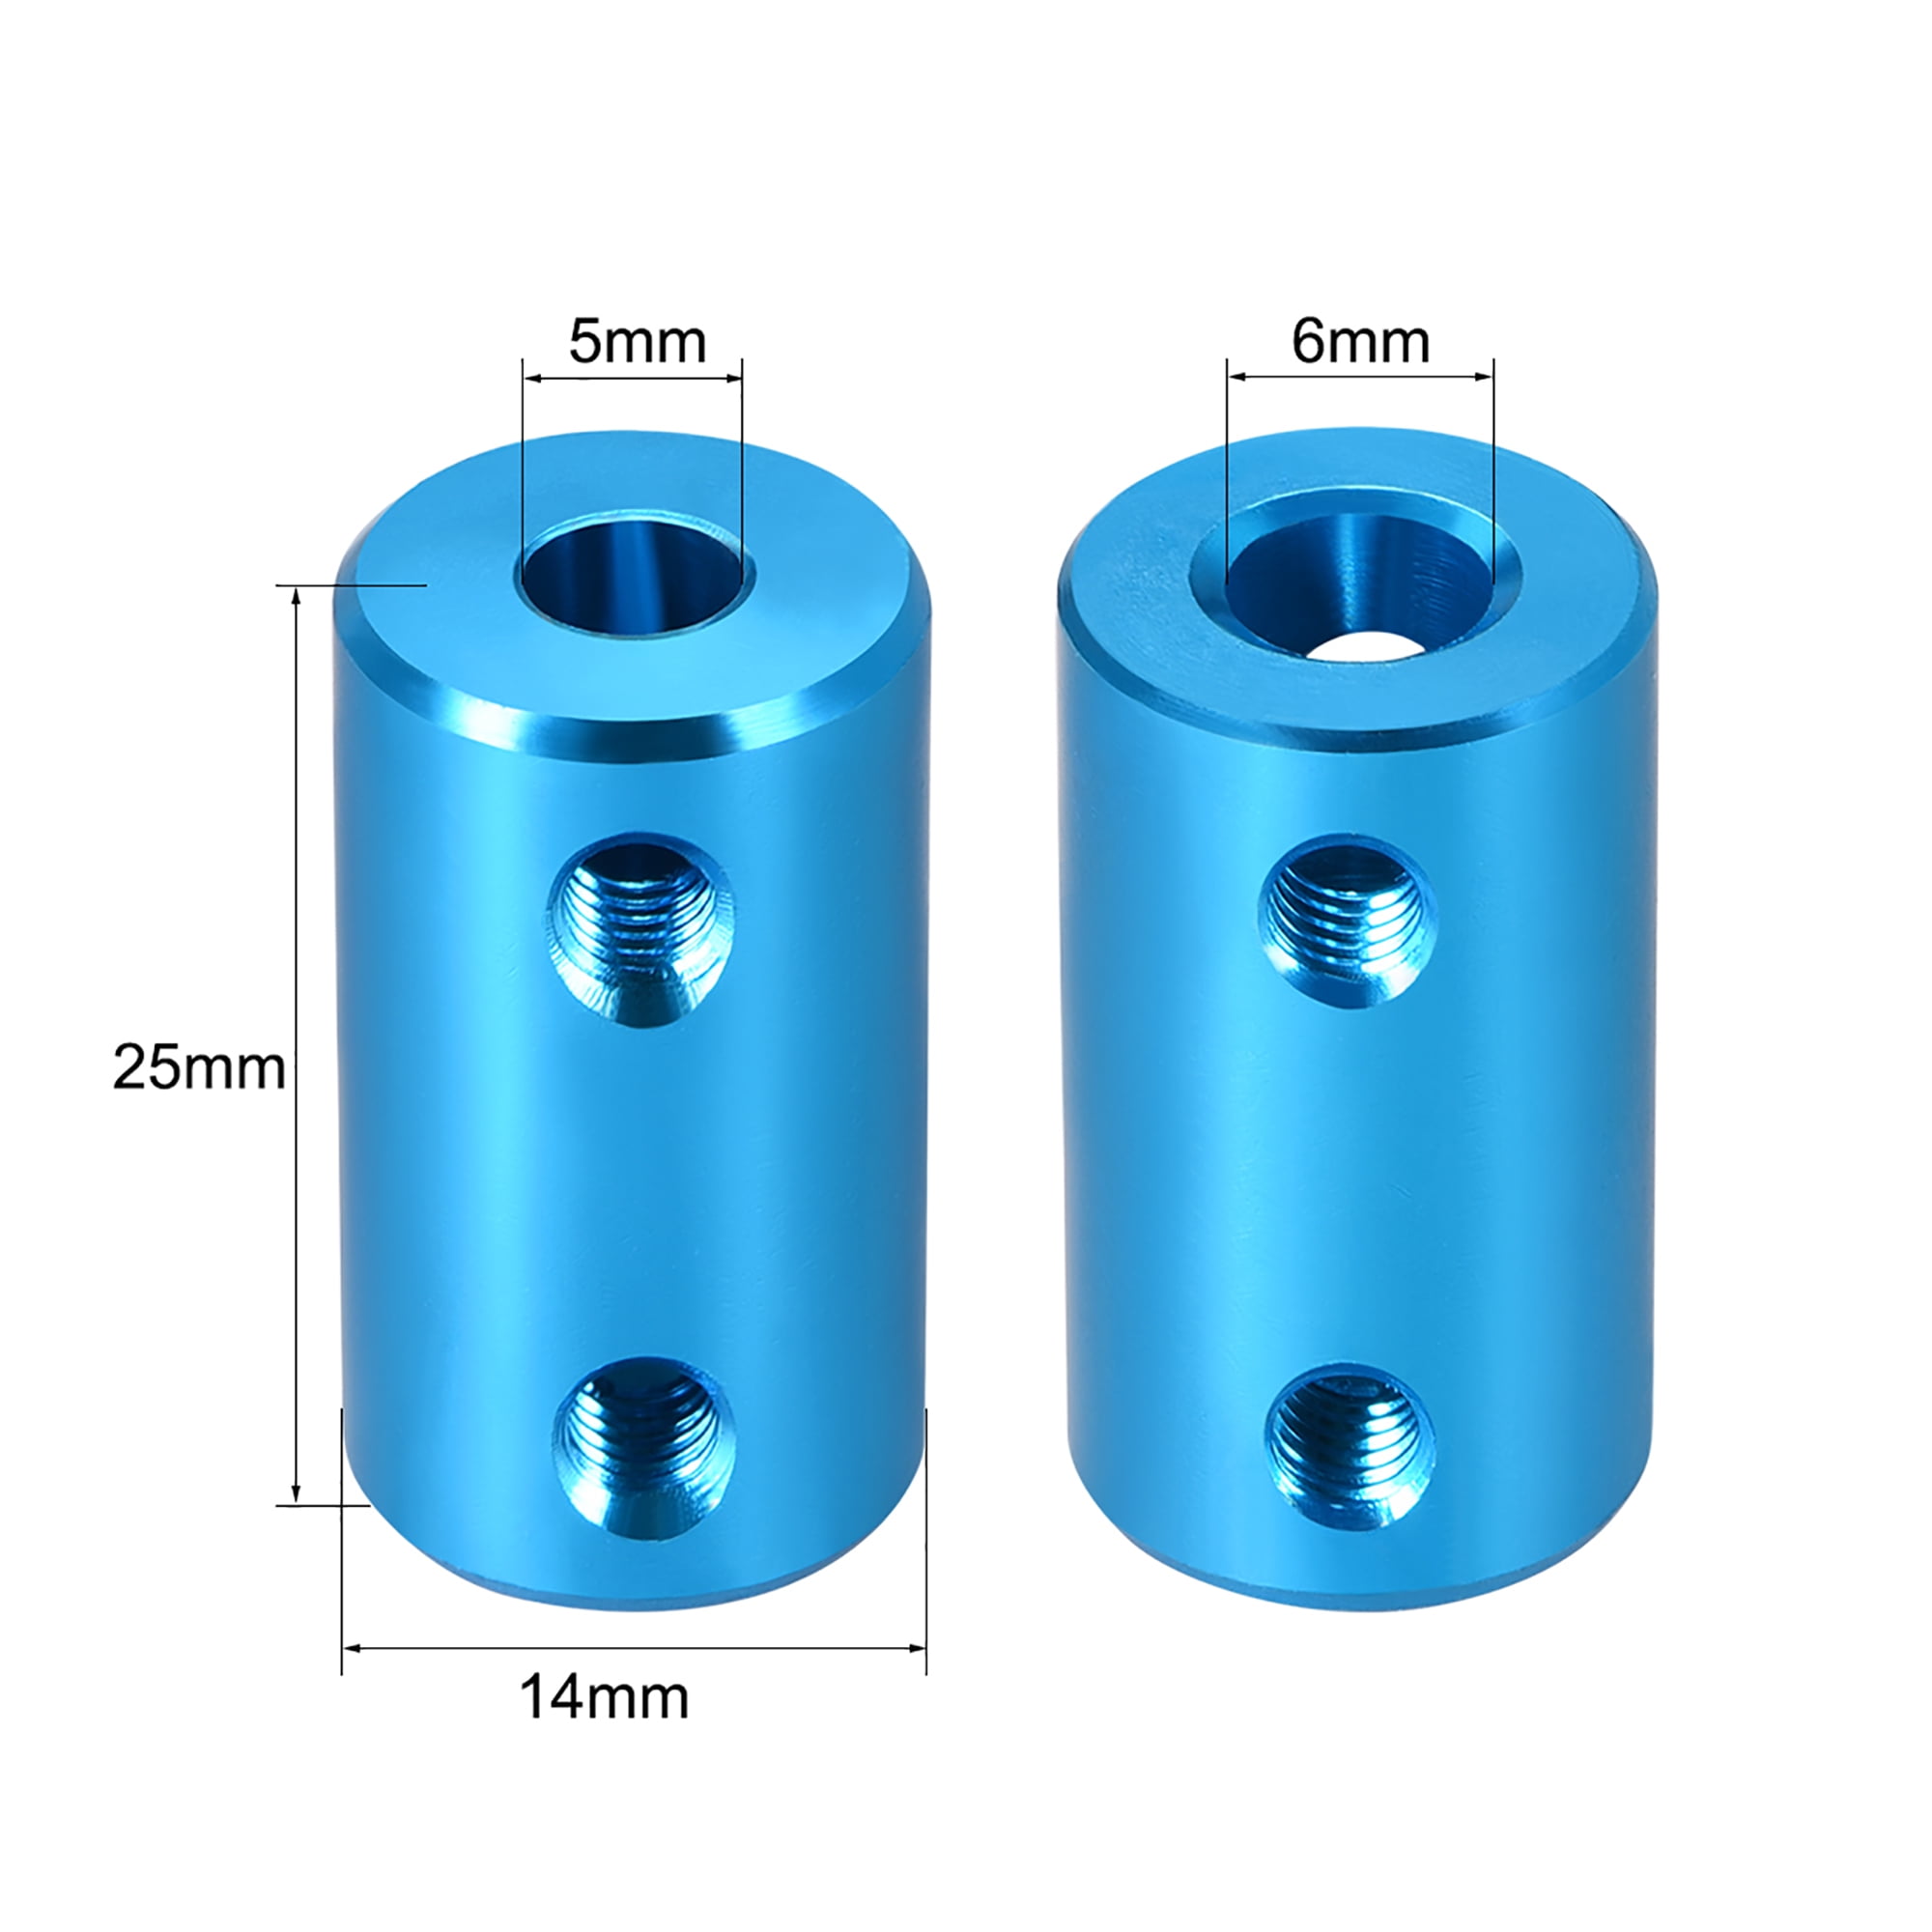 6mm to 8mm bore screw L25XD14 shaft coupling connector blue